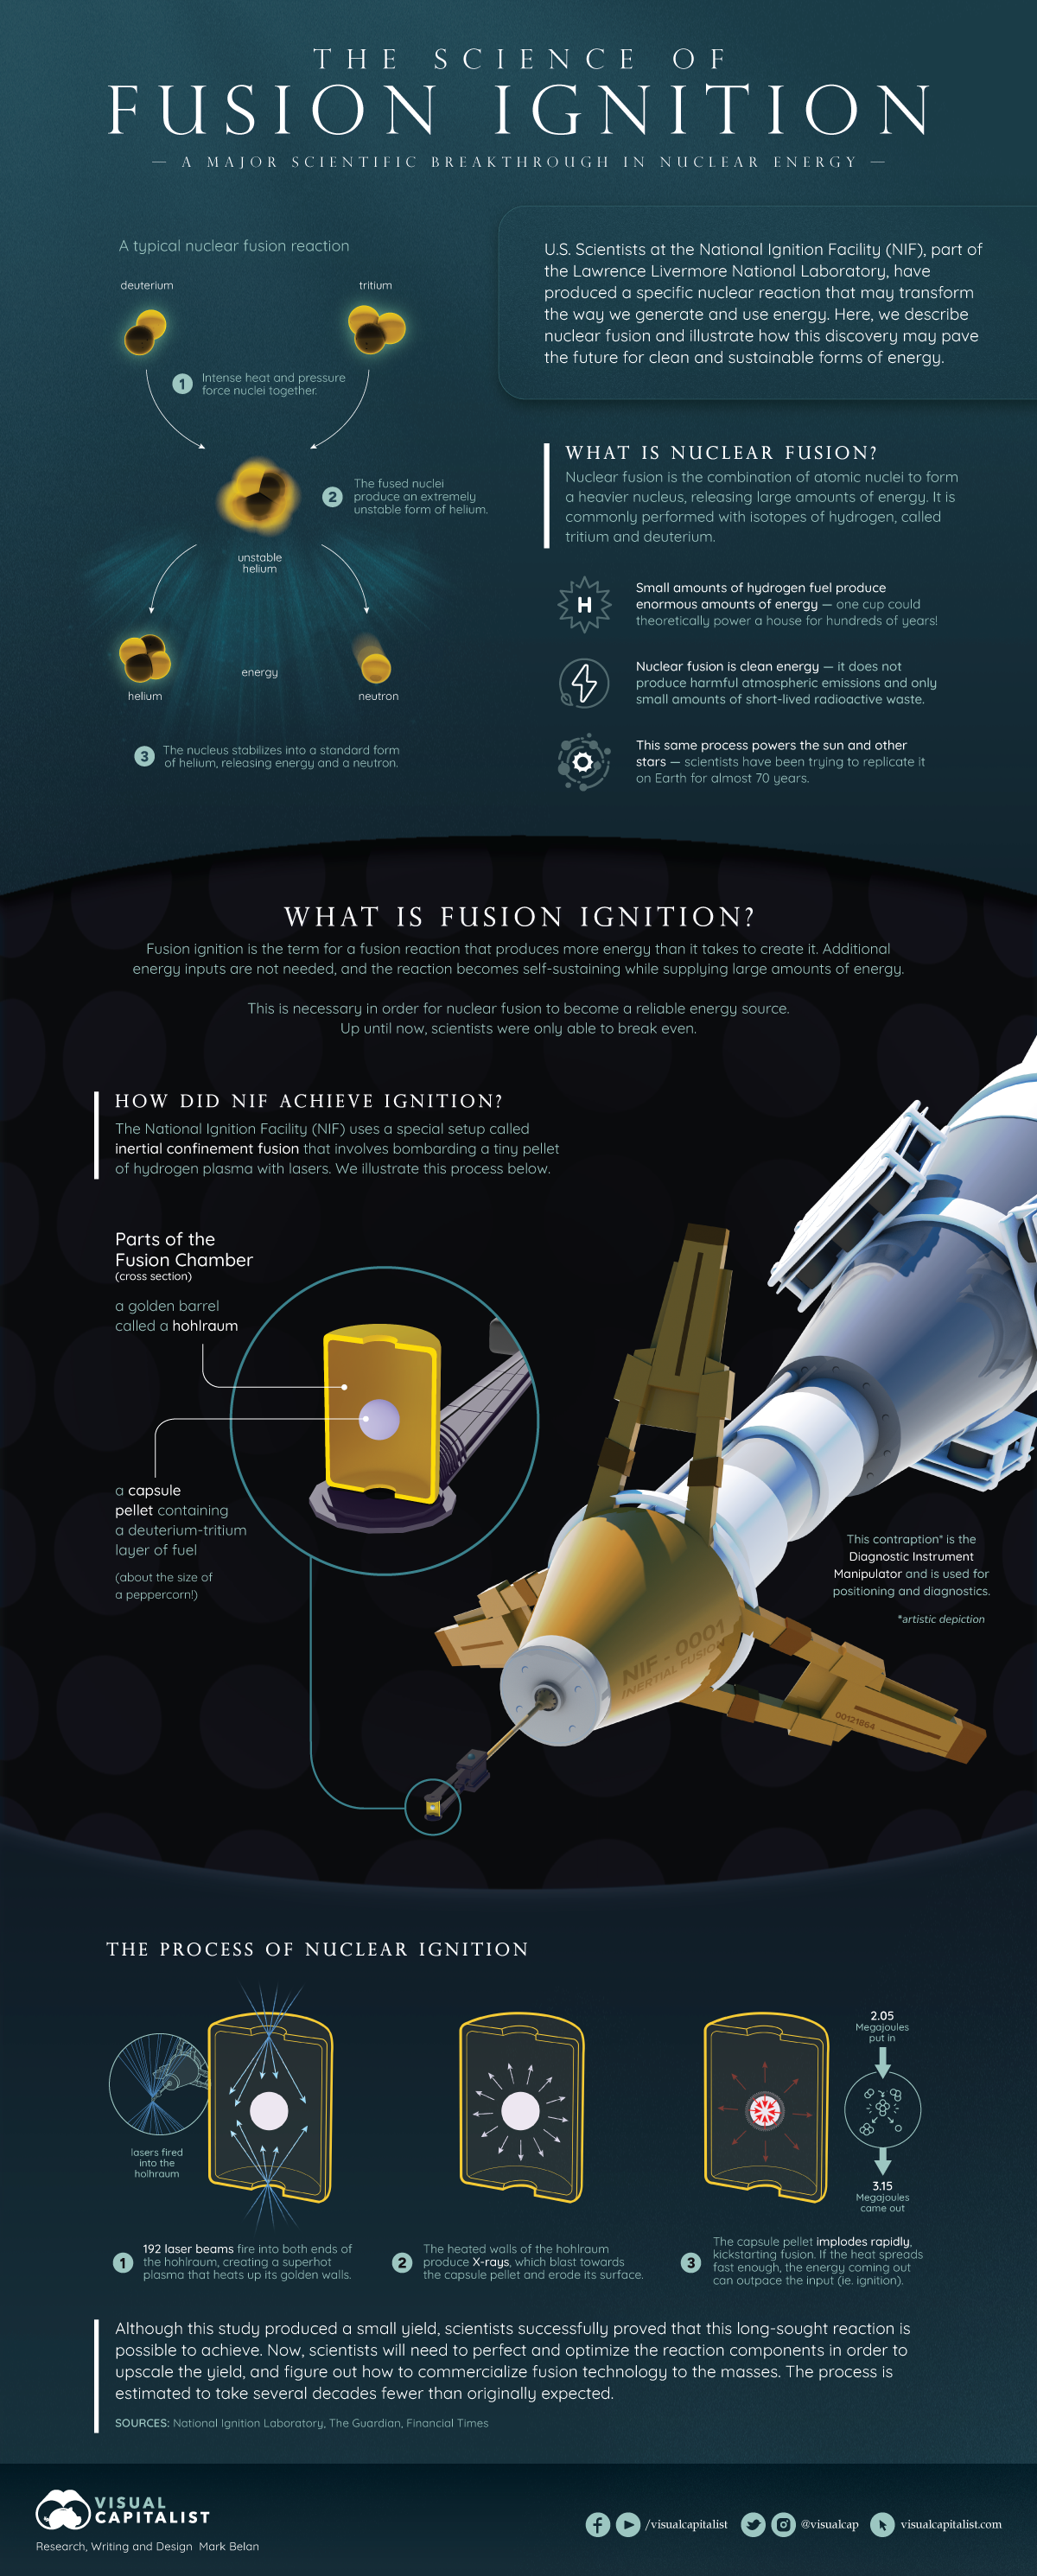 The Visual Capitalist: "Explainer: The Science of Nuclear Fusion"